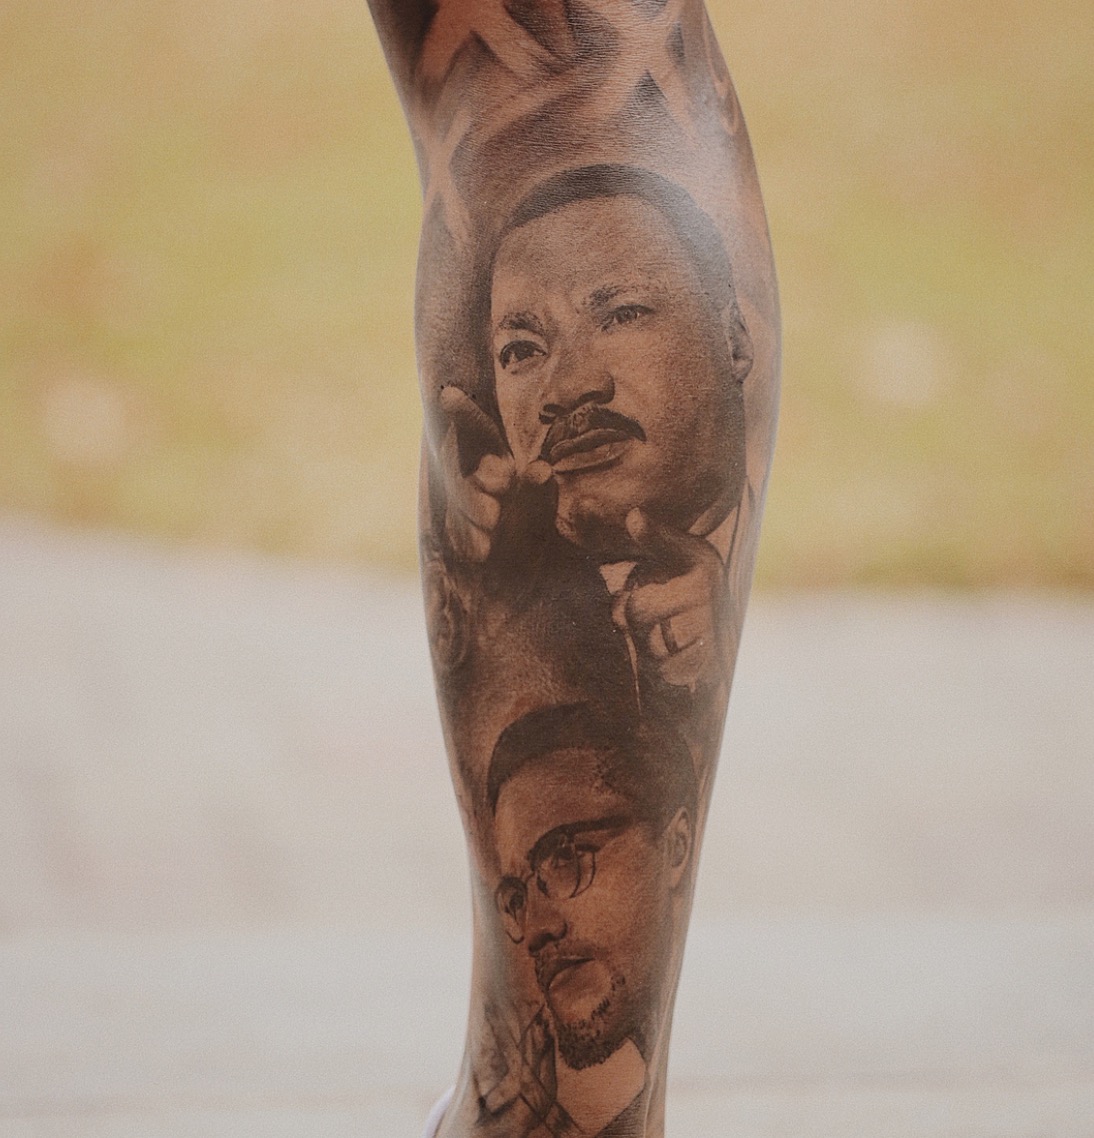 MAD INK• Does Odell have any space left on his legs to ink